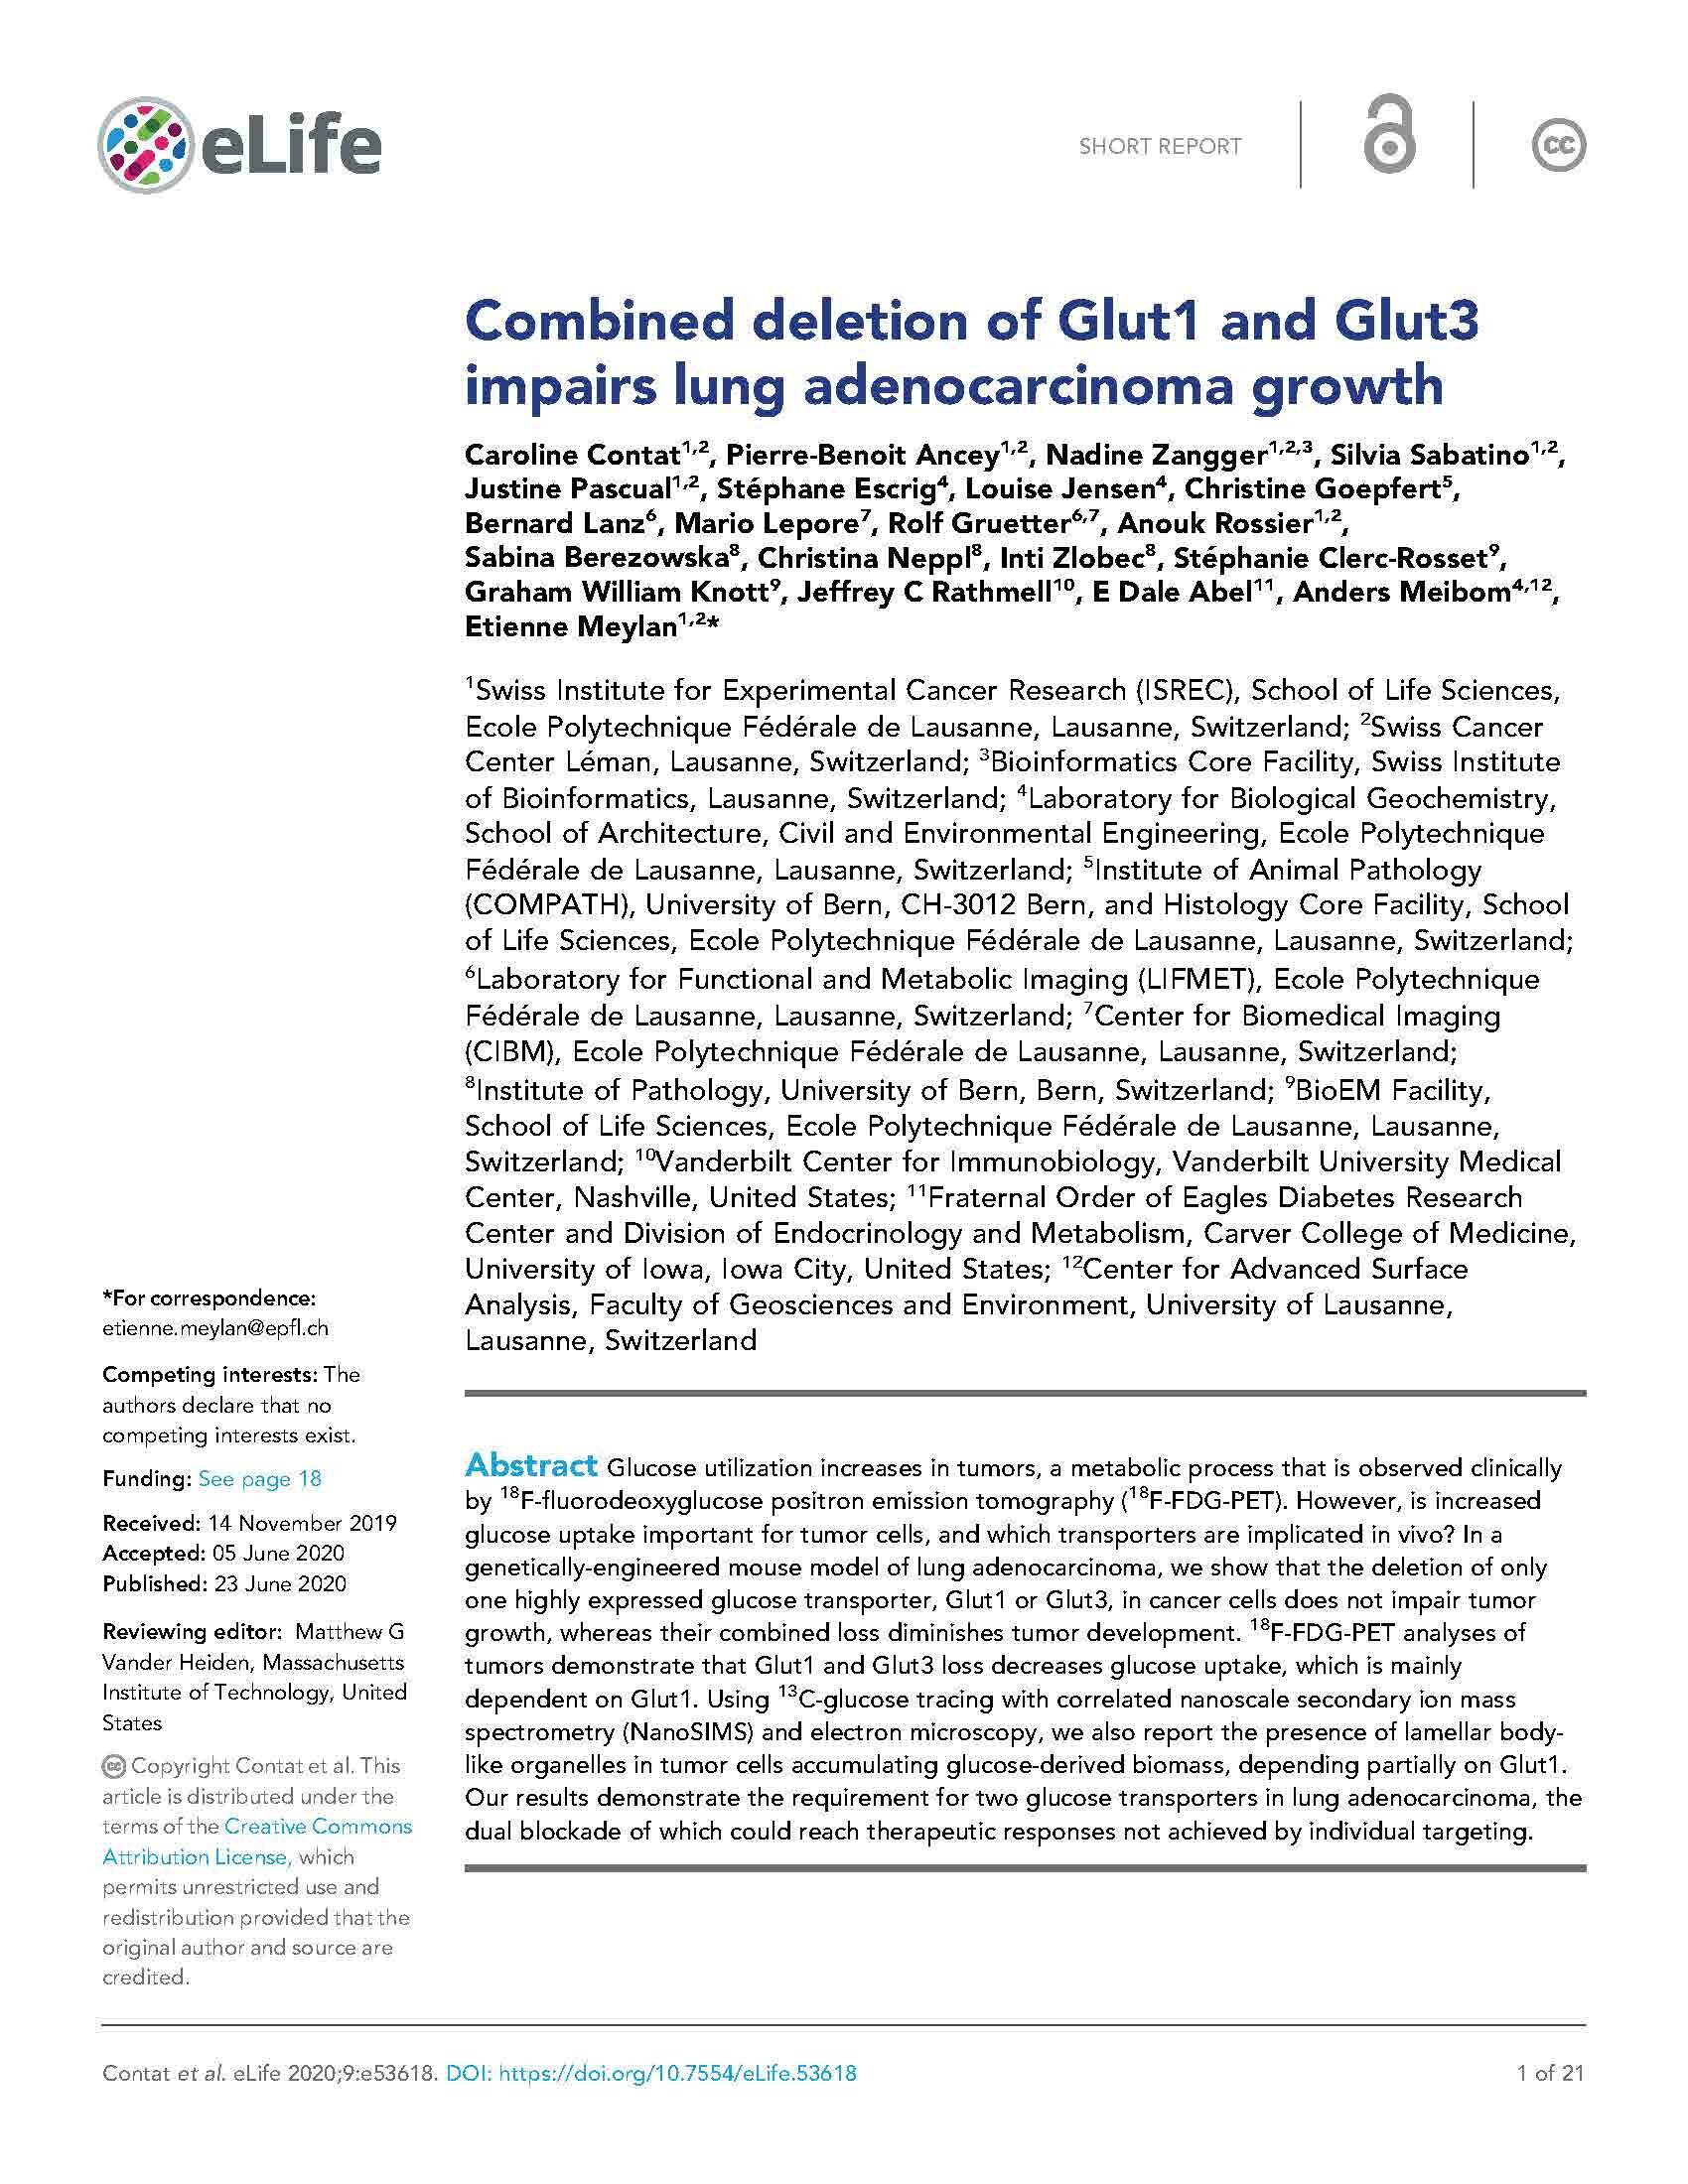 Combined_deletion_of_Glut1_and_Glut3_impairs_lung__Page_01.jpg